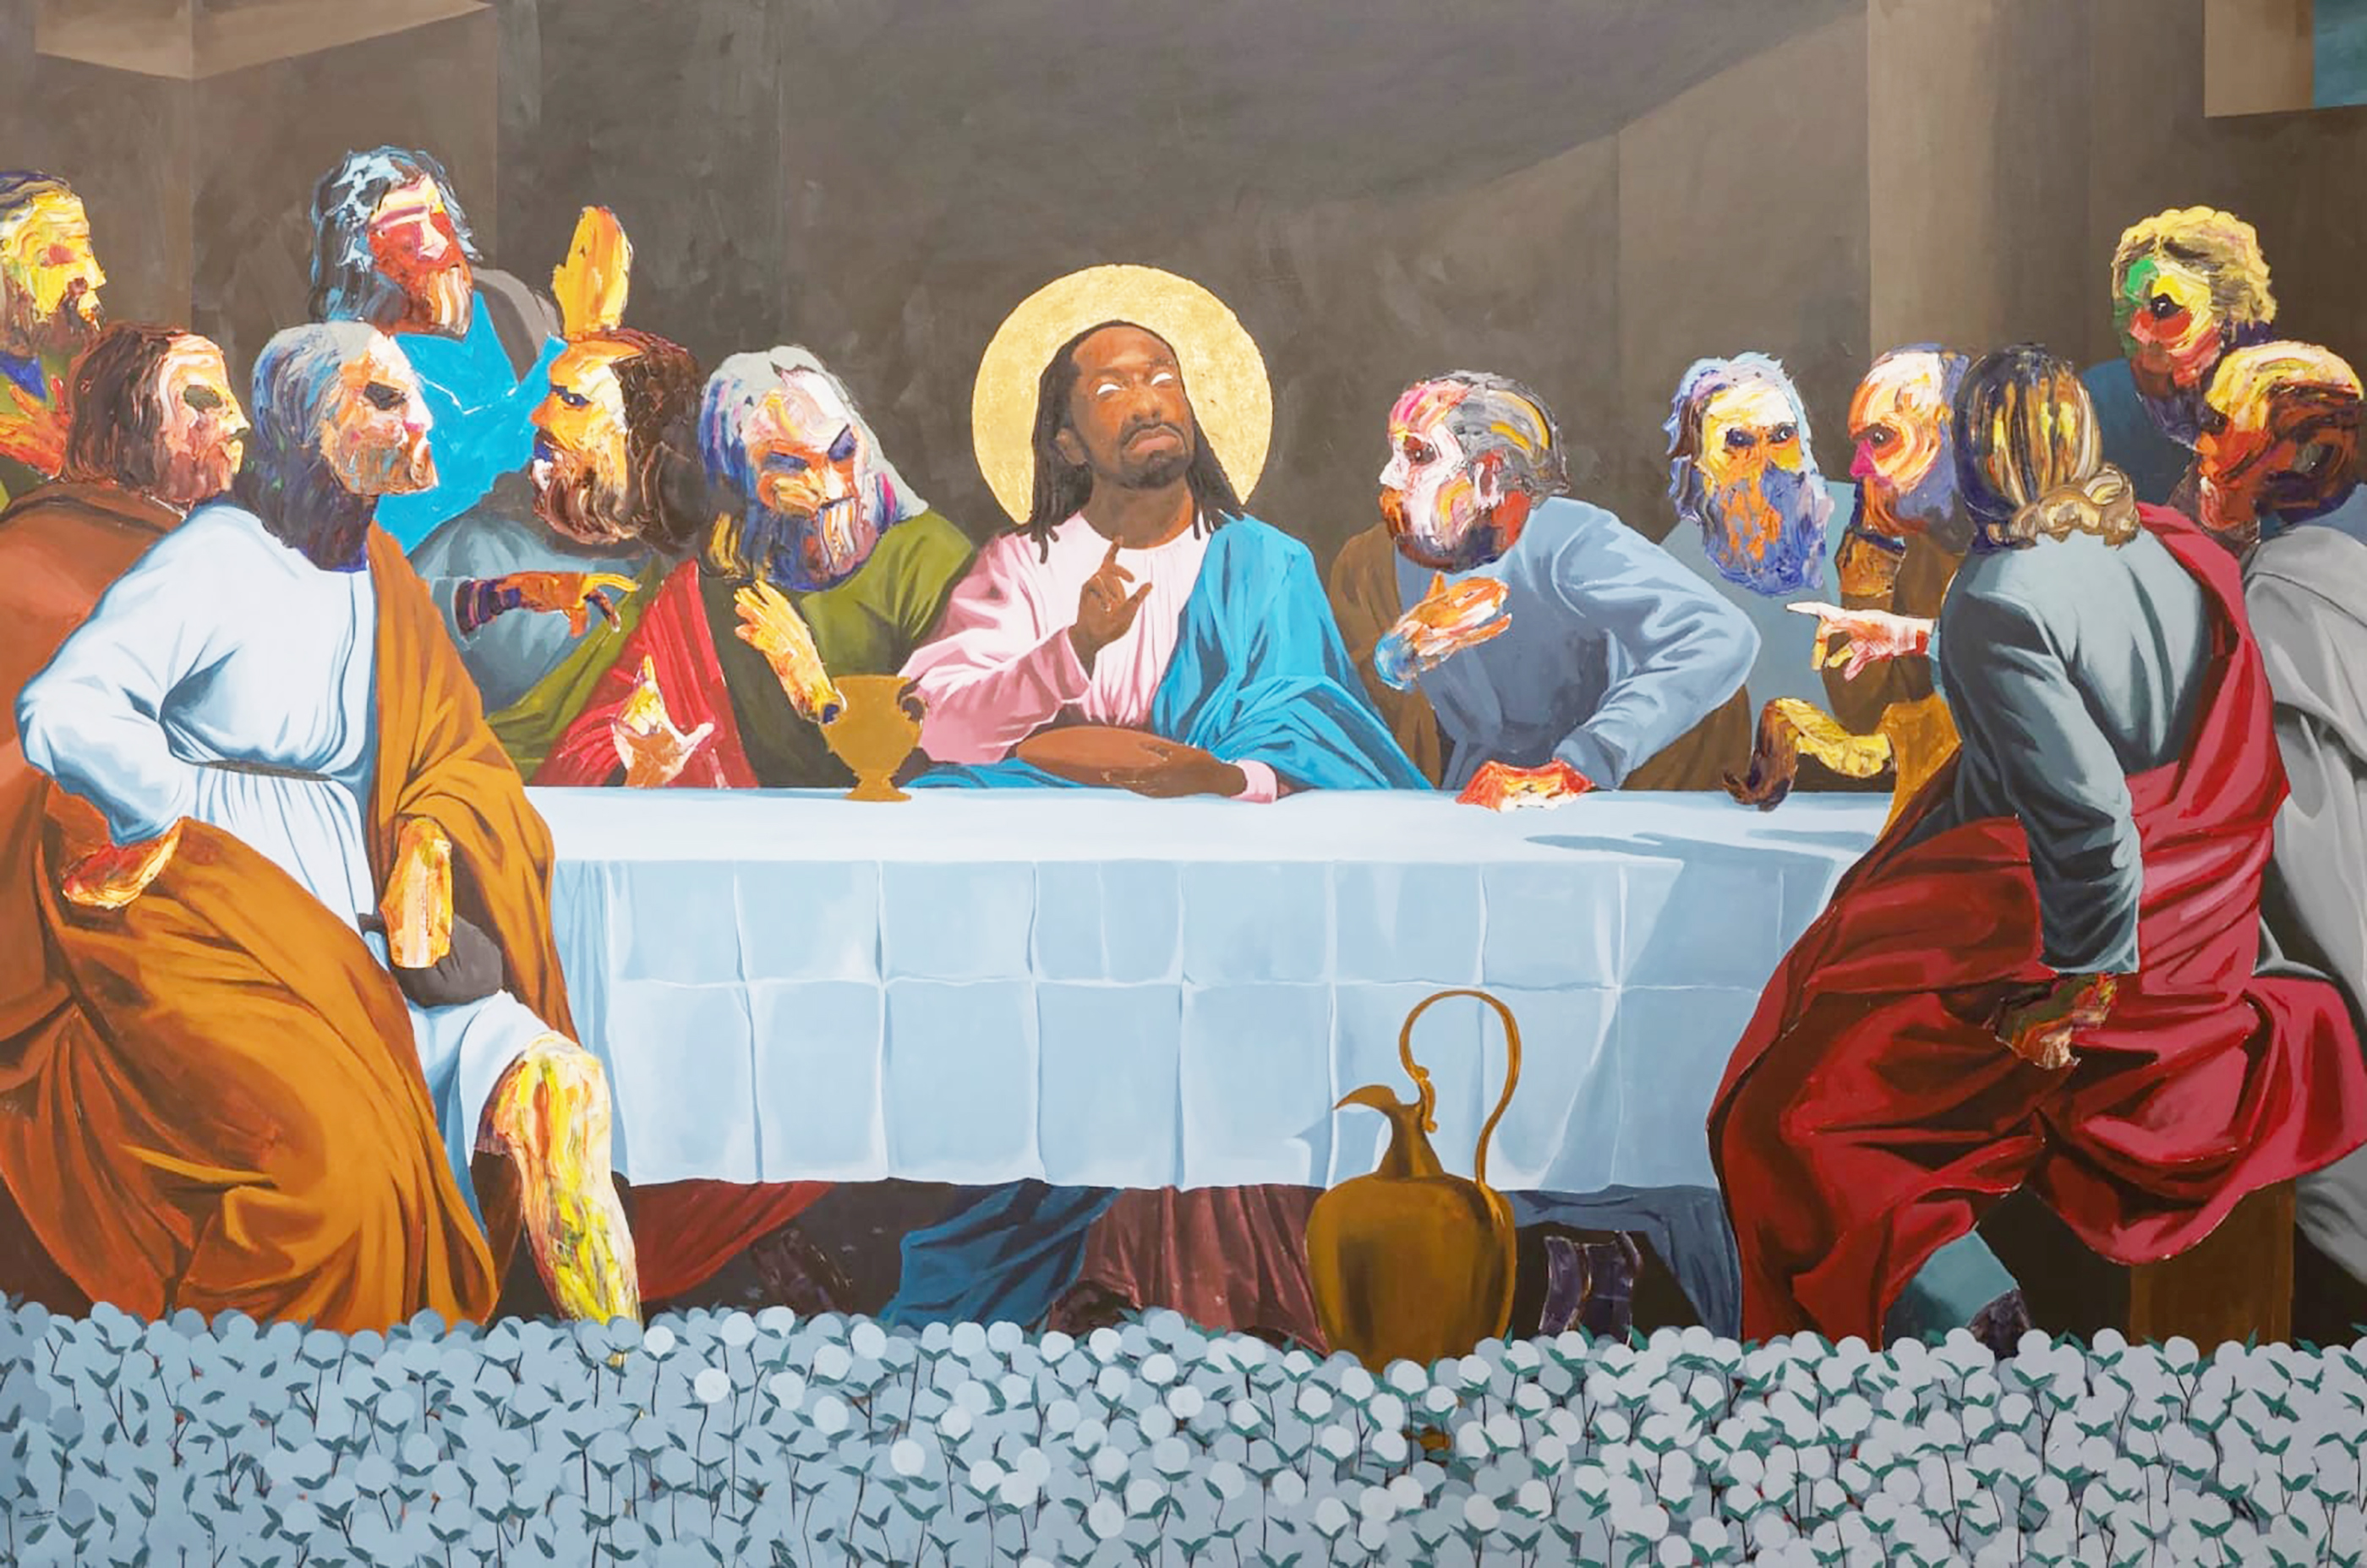 2022 painting by Bolowatife Promise Oyediran shows the artist's twist on The Last Supper